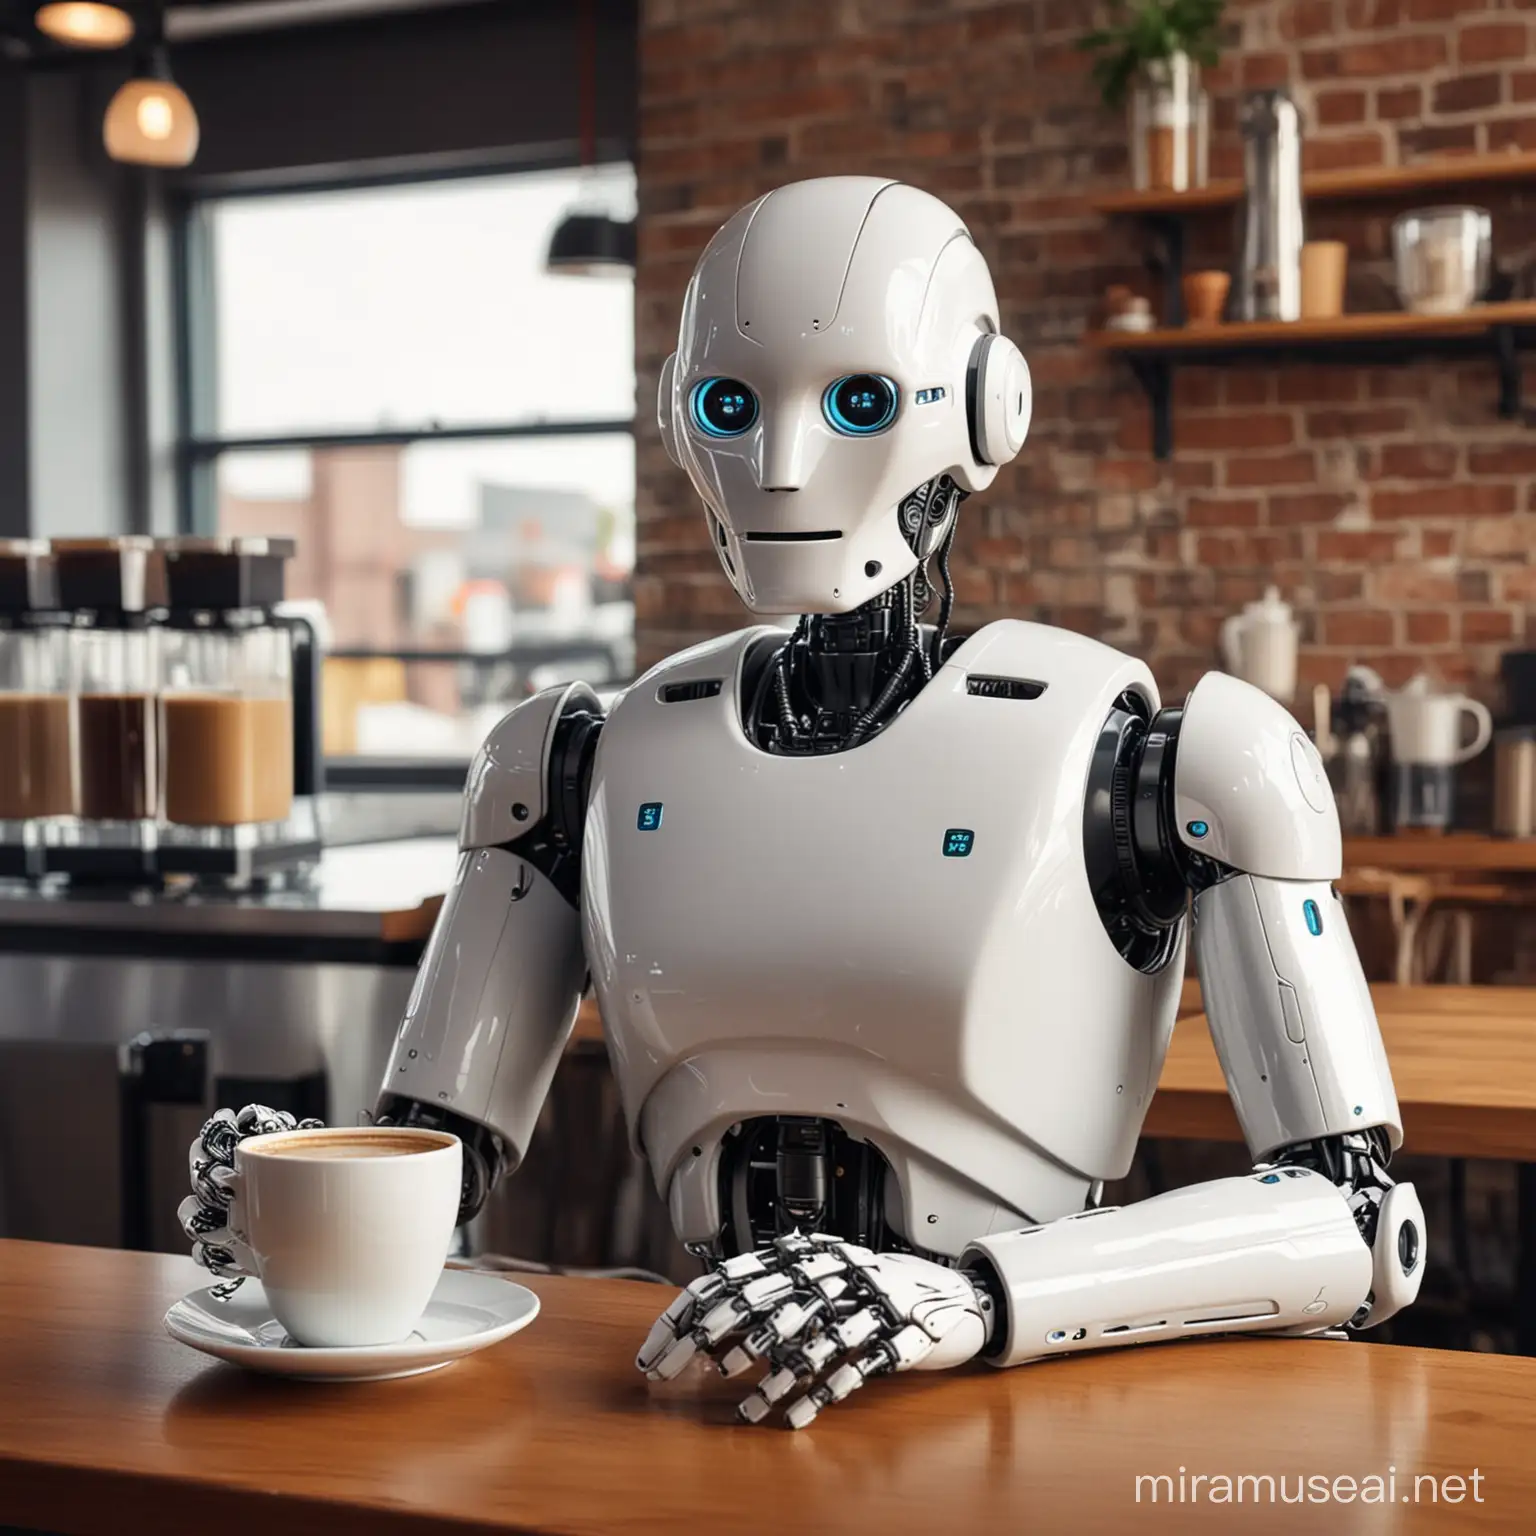 smooth robot in a coffee shop that blends coffee, the robot is holding a cup of coffee
